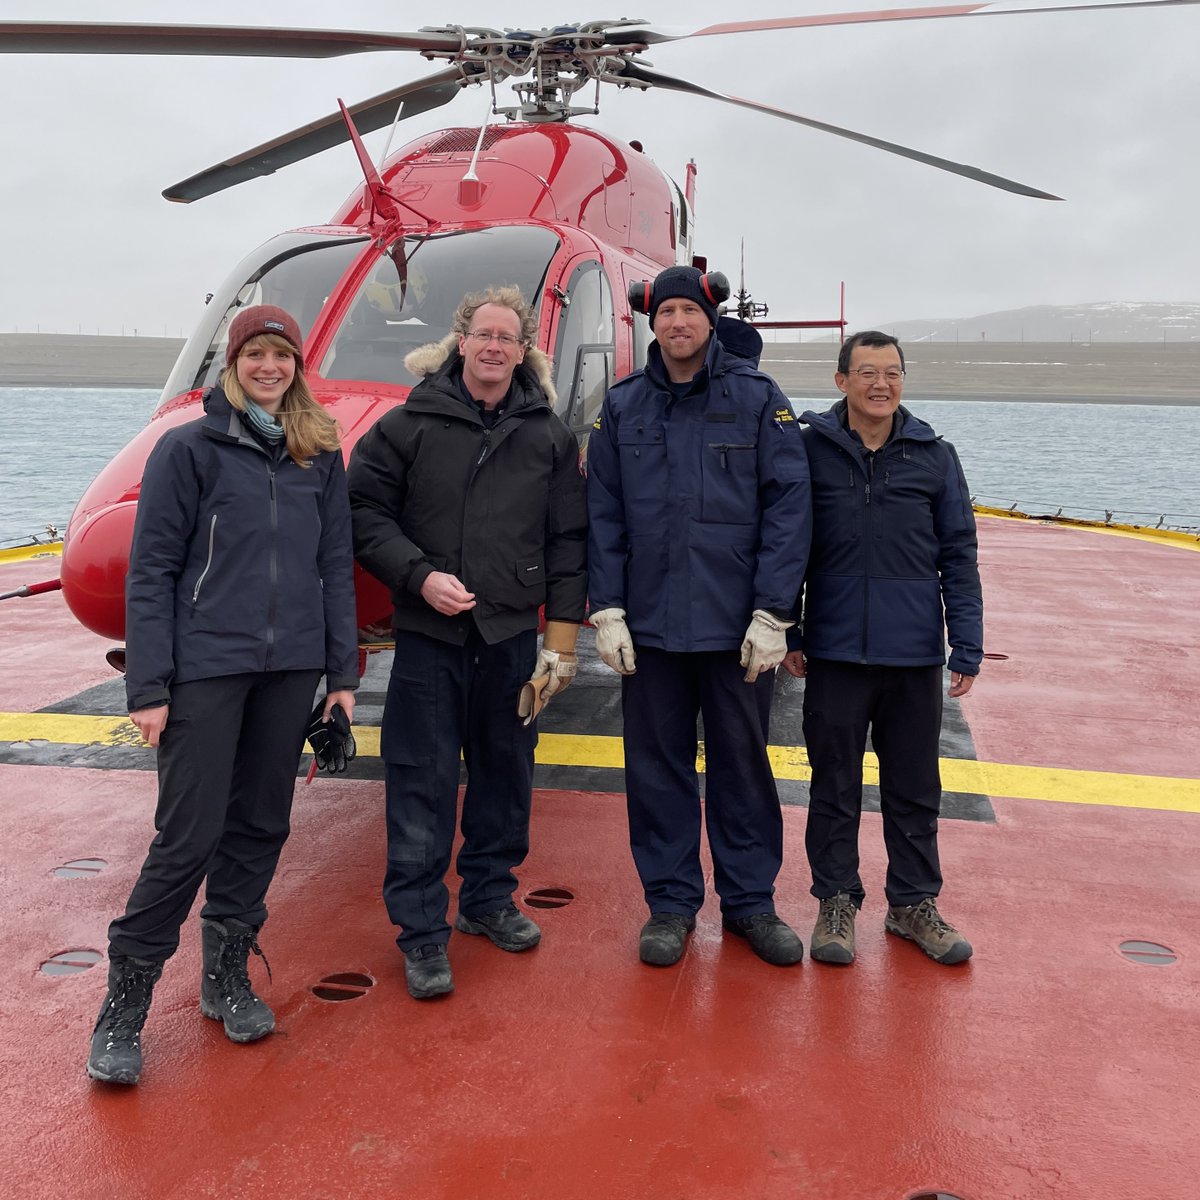 Last summer, one of the #OceansProtectionPlan teams mapped shorelines in the #Arctic ❄️ to prioritize the areas to be cleaned up in the event of an oil spill. Learn more: ow.ly/vekv50QjRJ3 📷 Andréanne Dupont and Valerie Wynja #CdnSci #ArcticScienceMonth